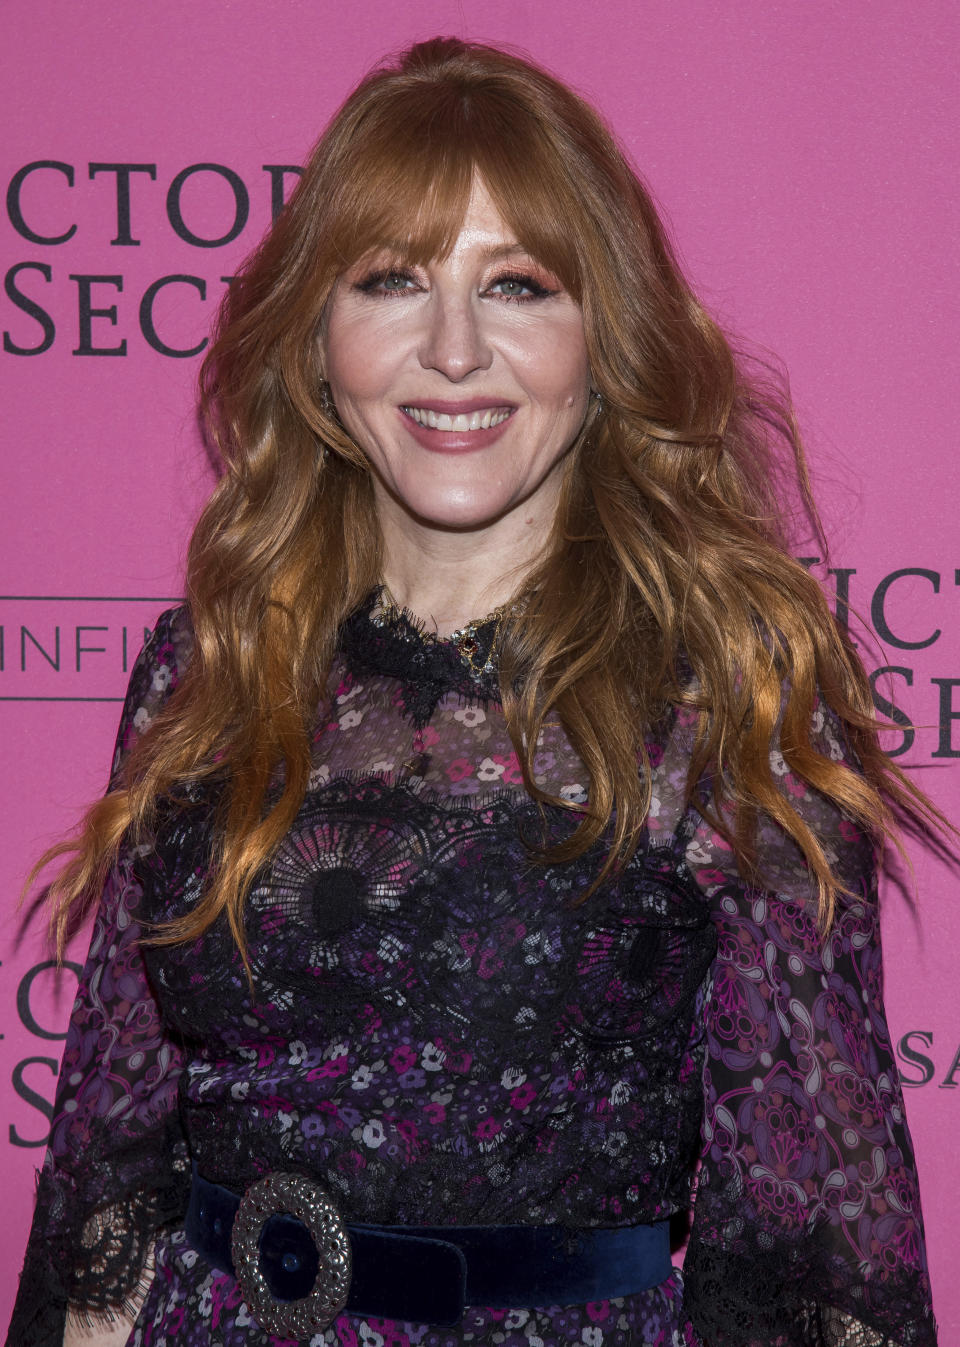 Charlotte Tilbury attends the 2018 Victoria's Secret Fashion Show after-party at Pier 94 on Thursday, Nov. 8, 2018, in New York. (Photo Charles Sykes/Invision/AP)